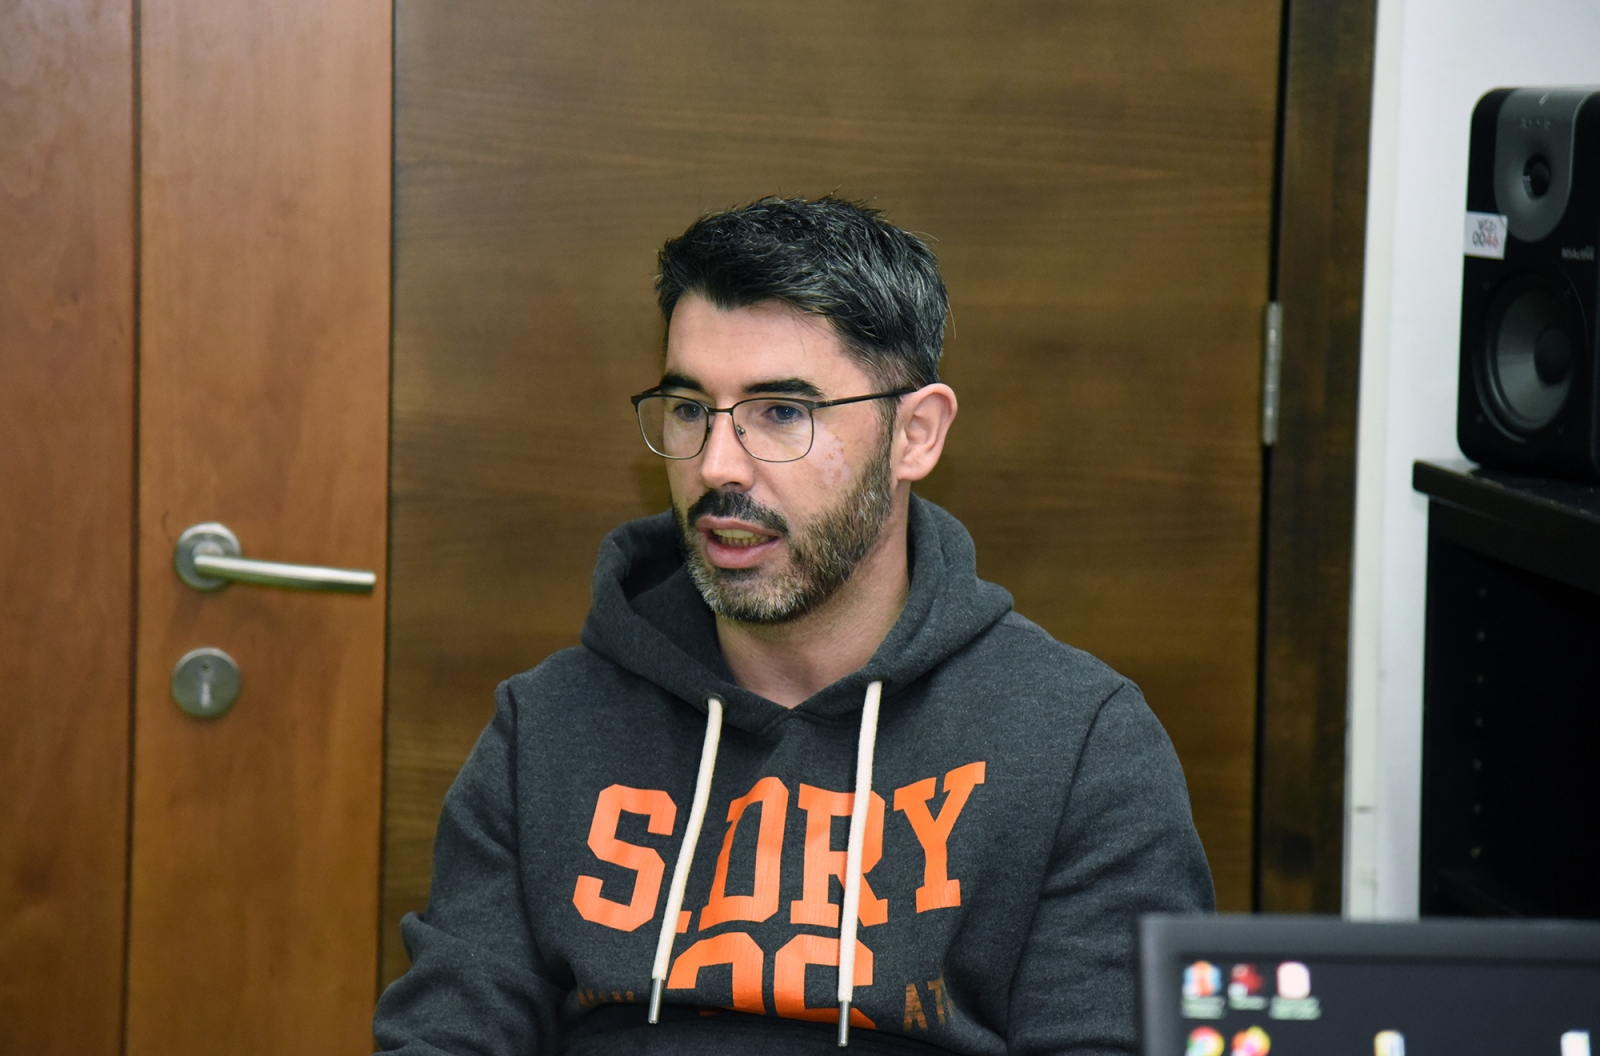 Prominent UX/UI designer Amir Kadić holds a guest lecture at IUS